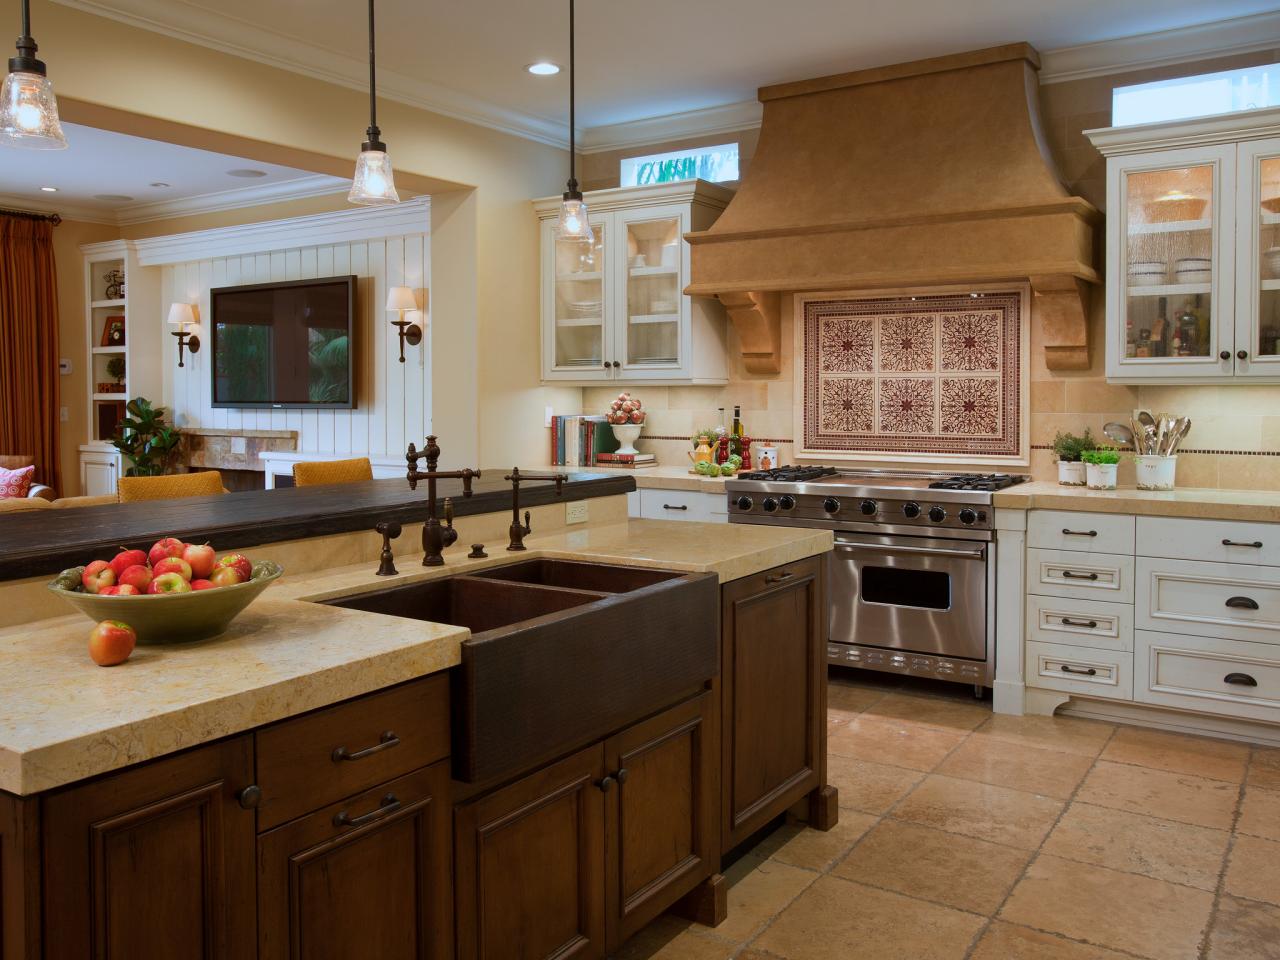 Craftsman-Style Kitchen Cabinets: Pictures, Options, Tips & Ideas | HGTV